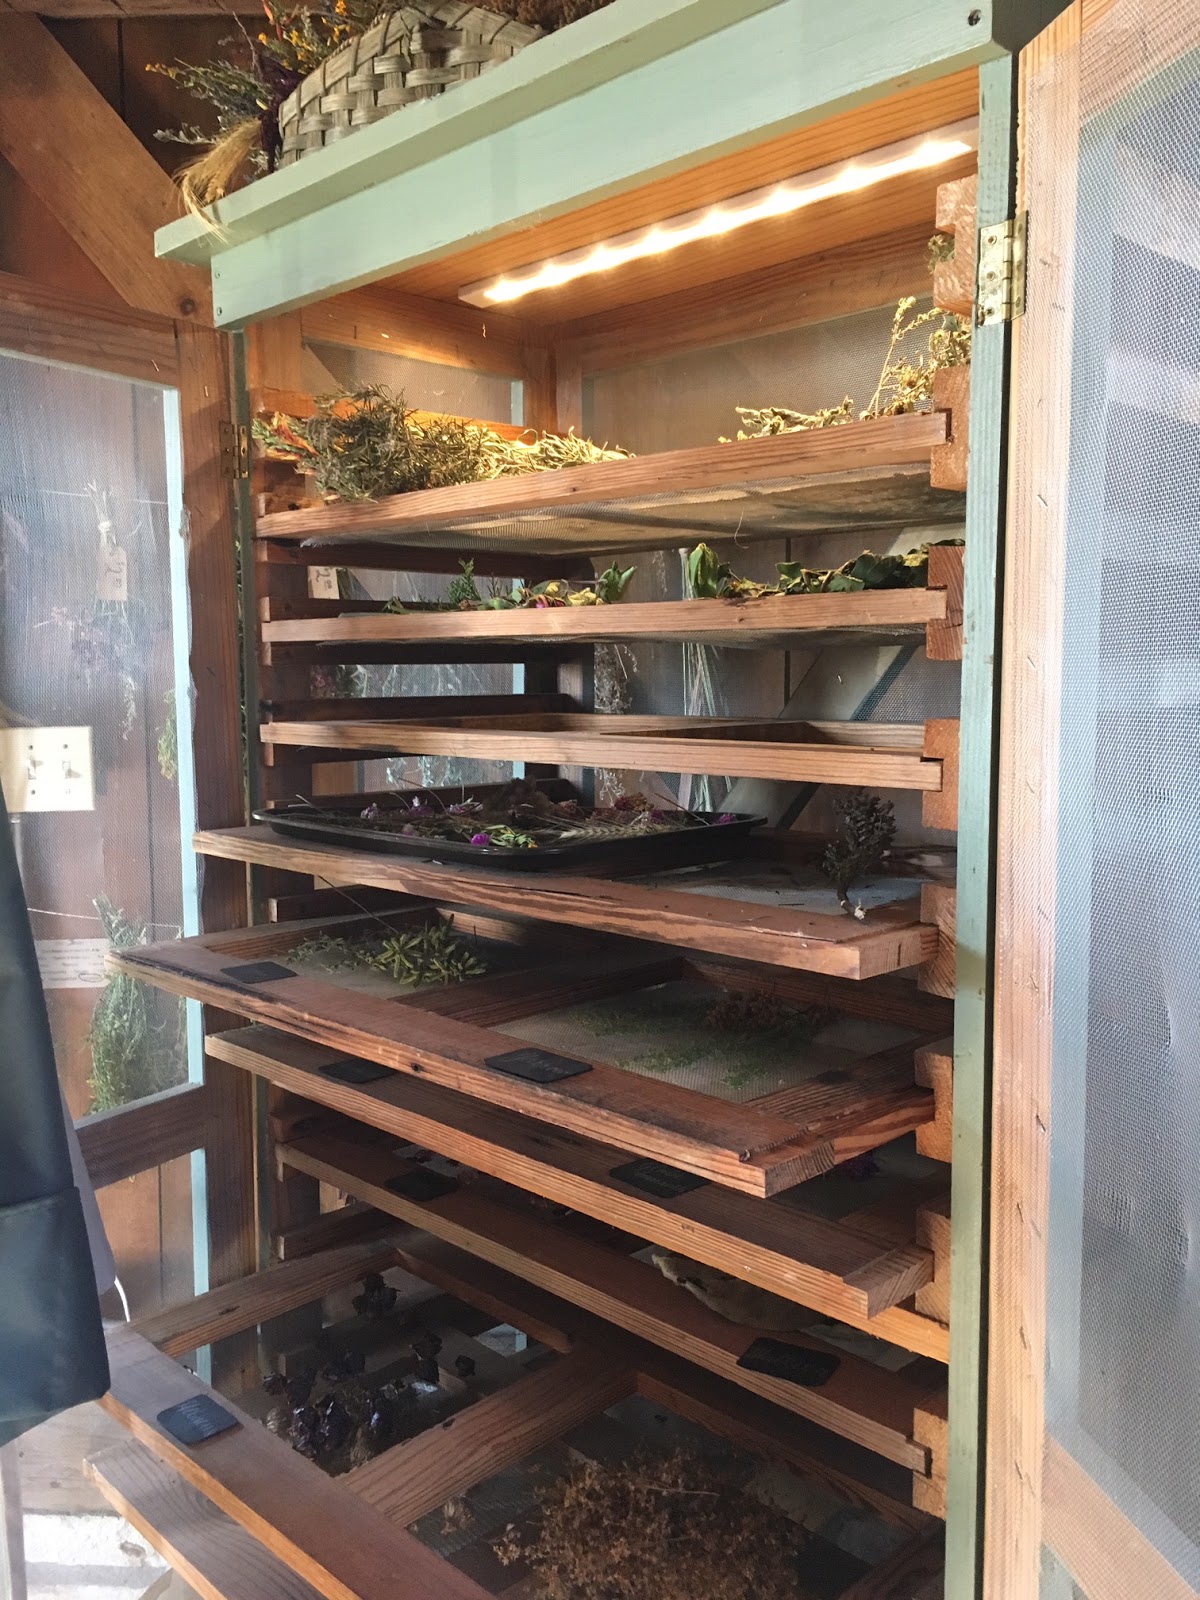 The Texas Pioneer Woman Herb Drying